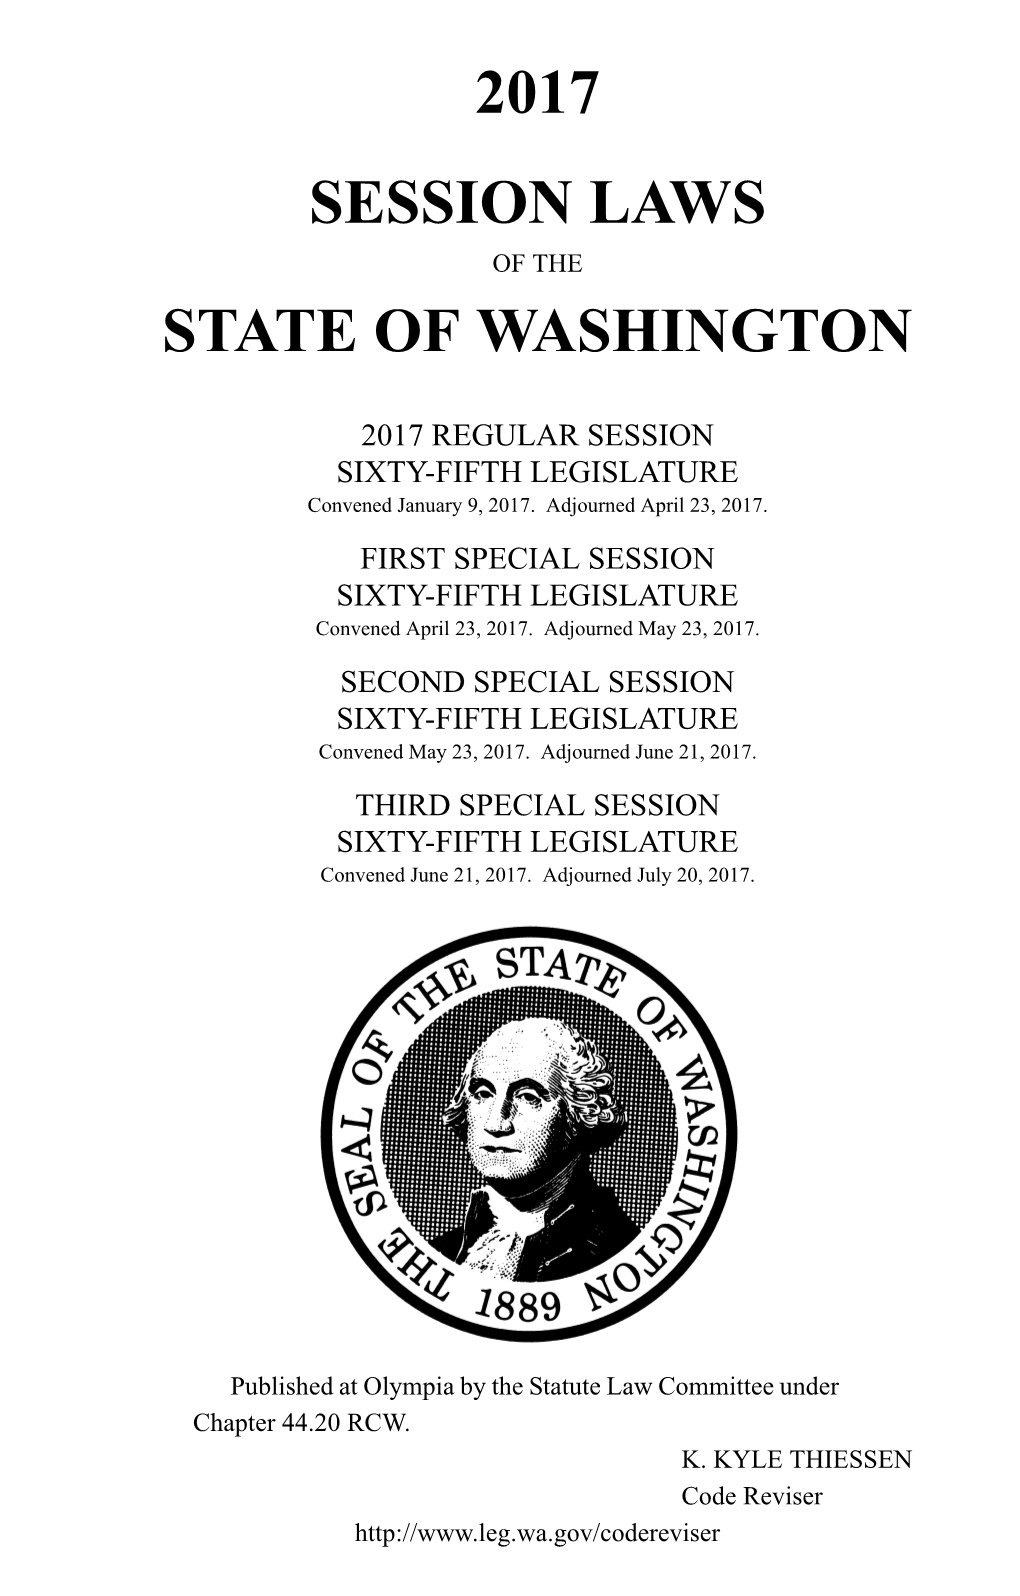 2017 Session Laws of the State of Washington